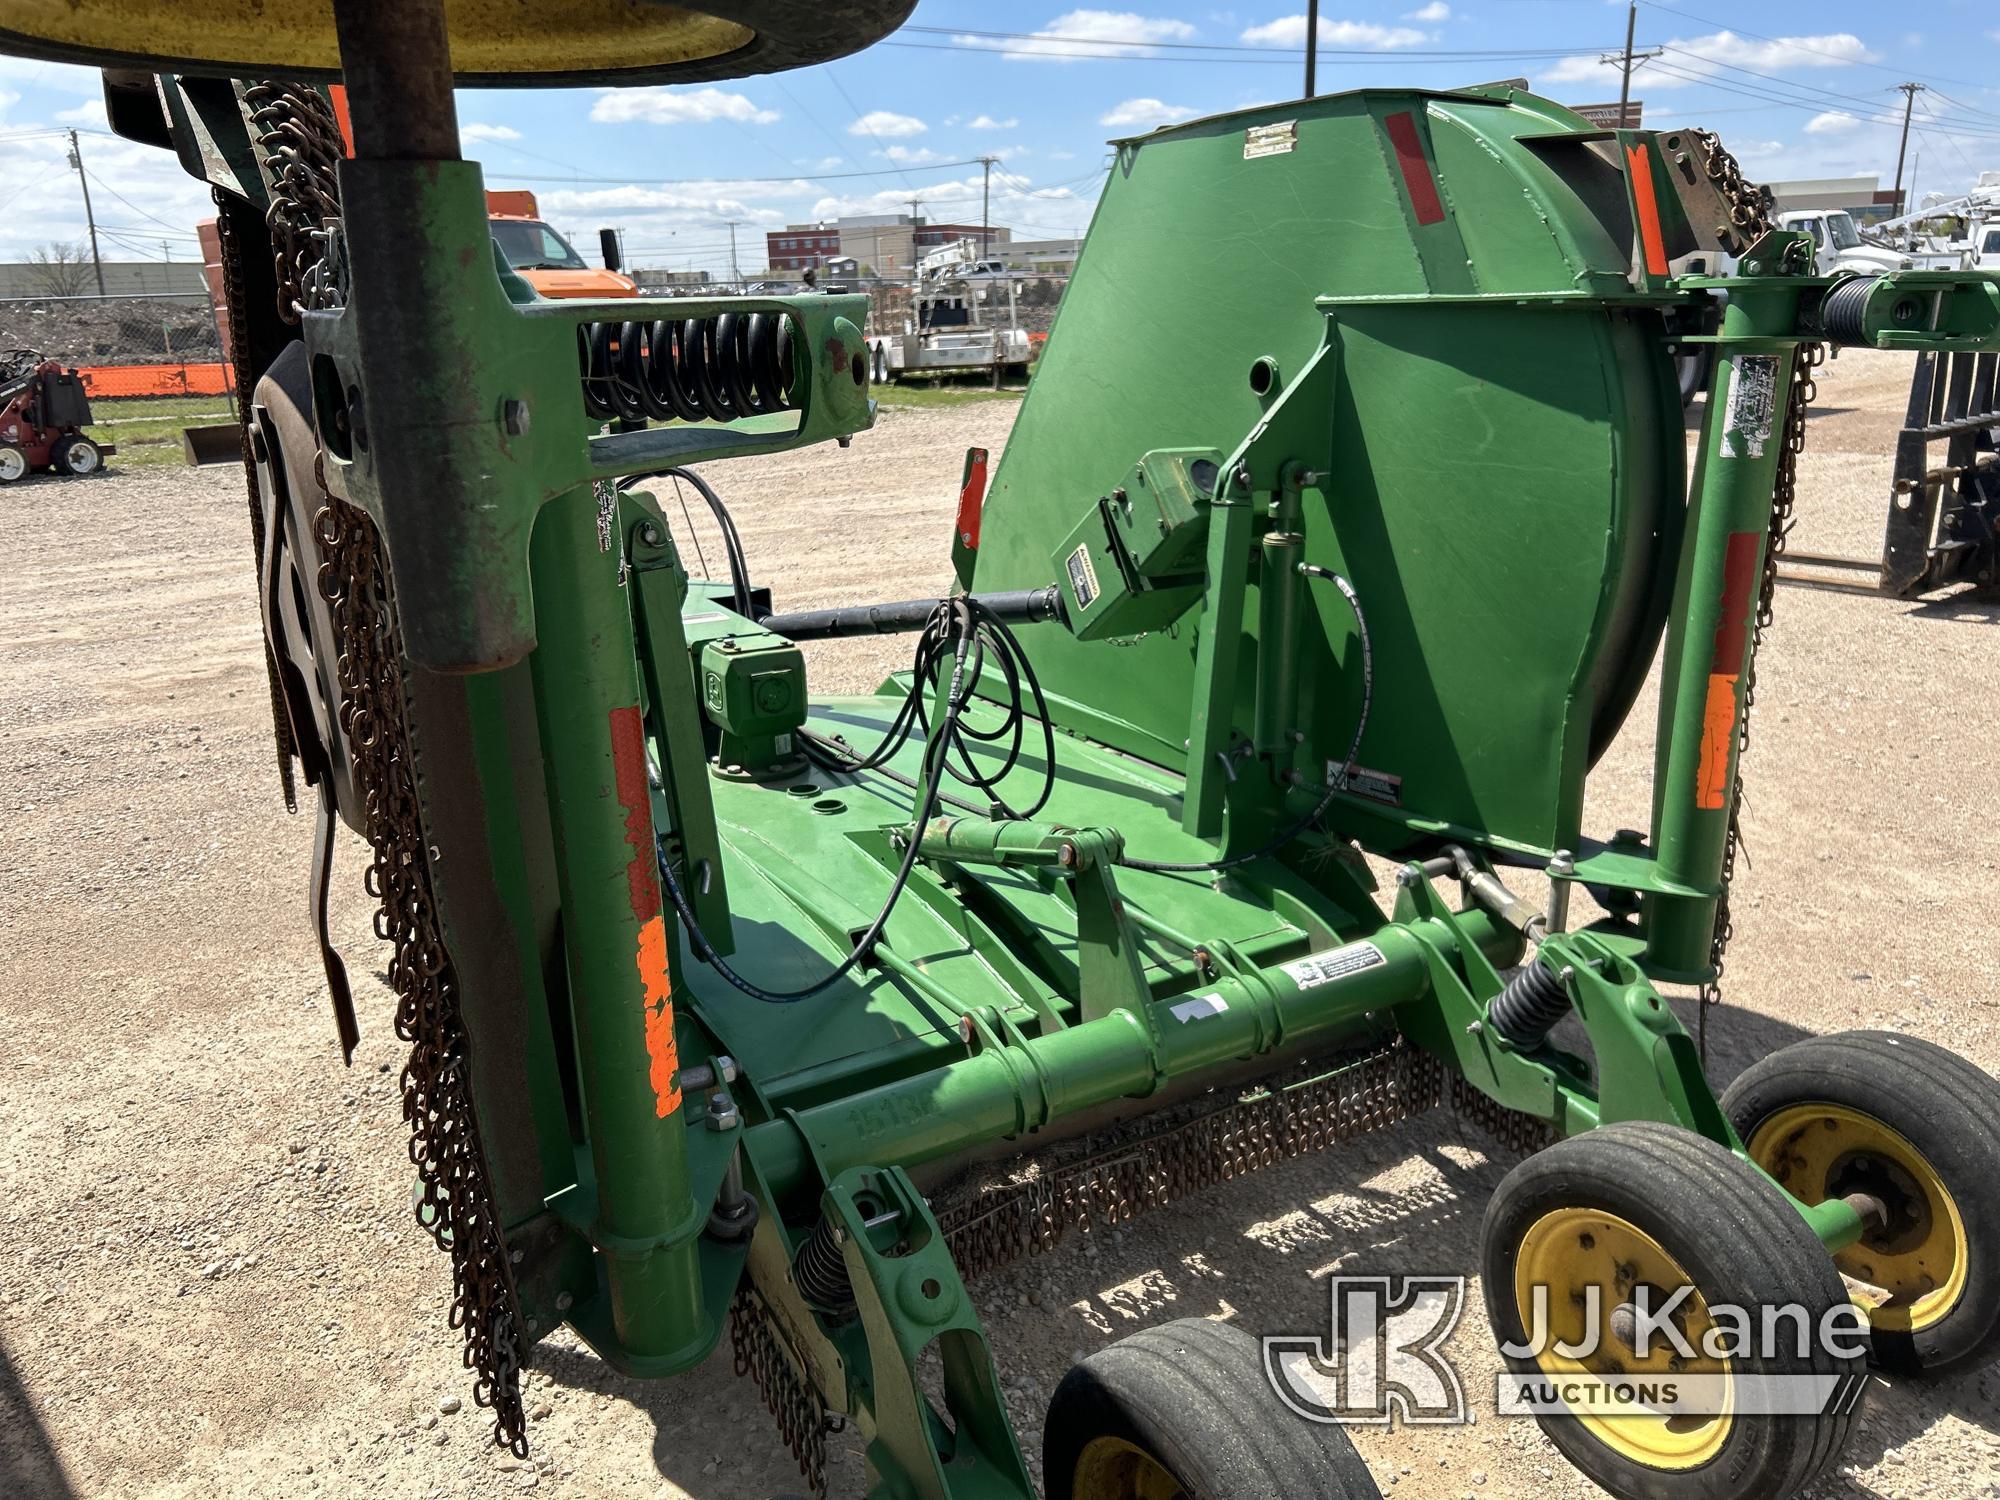 (Waxahachie, TX) 2015 John Deere HX15 Batwing Mower Attachment, City of Plano Owned Fair Condition